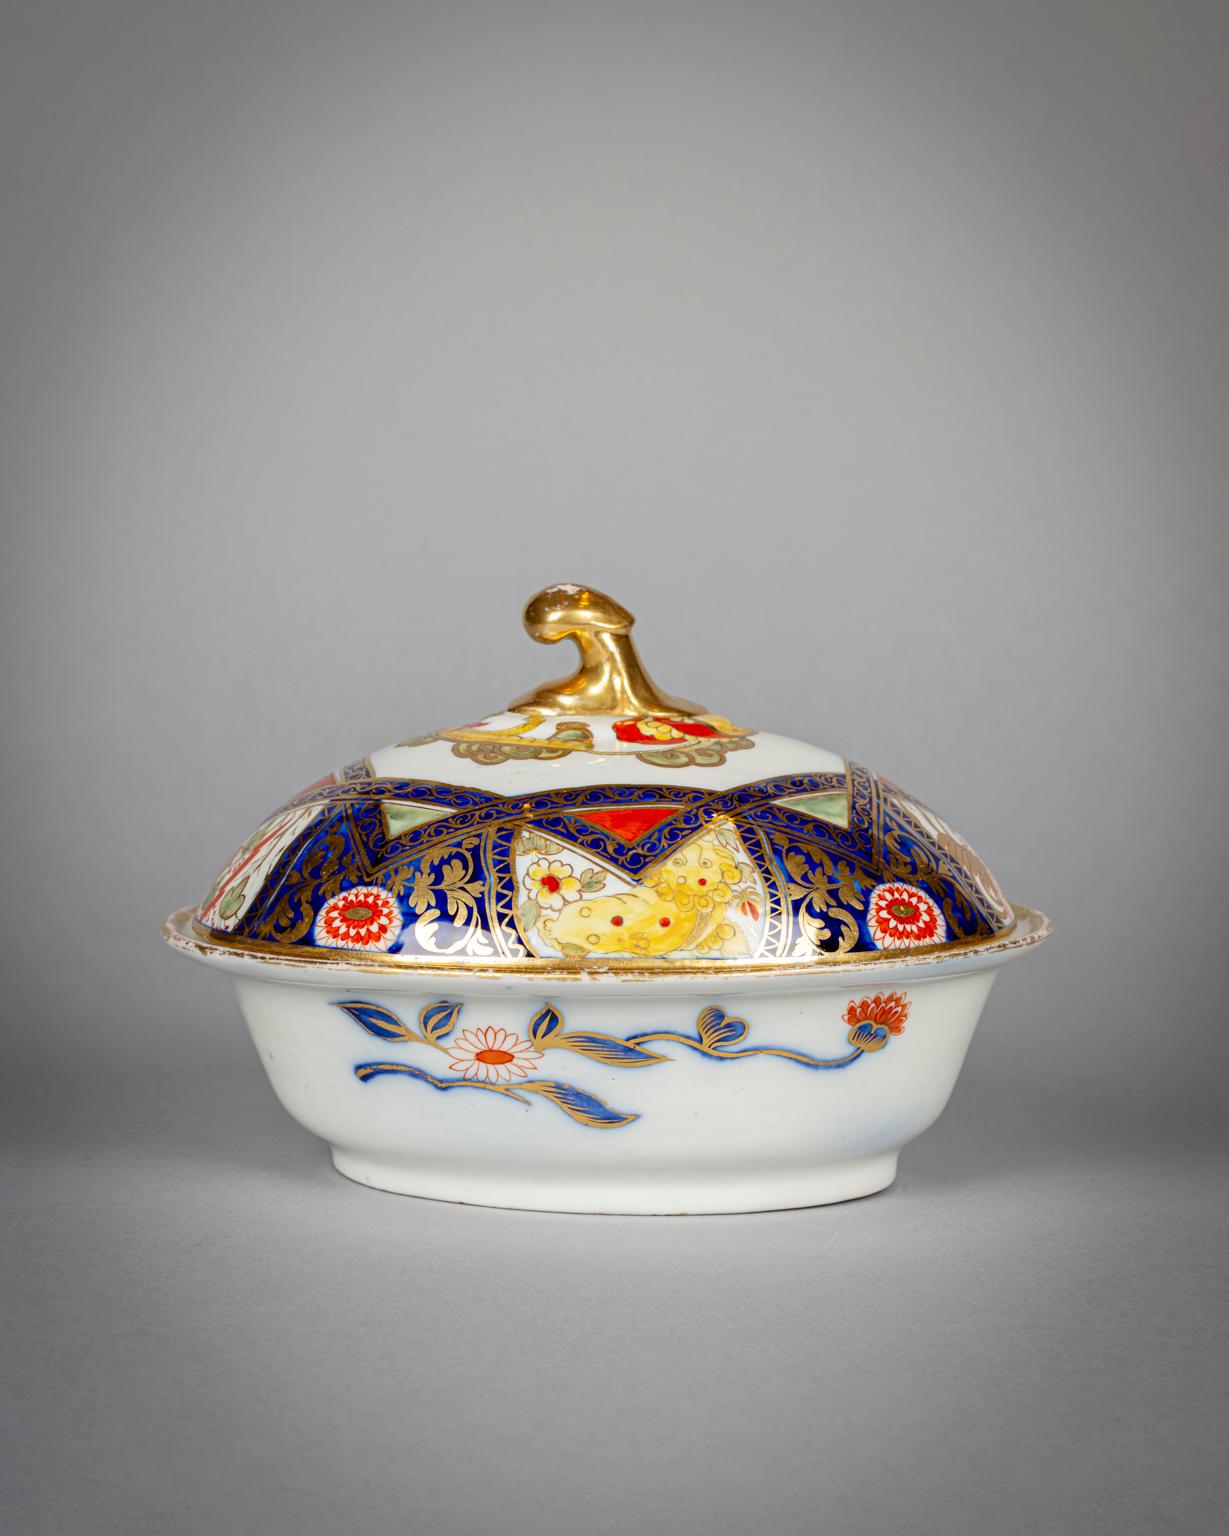 English Porcelain Five-Part Serving Set on a Wooden Tray, circa 1830 For Sale 4